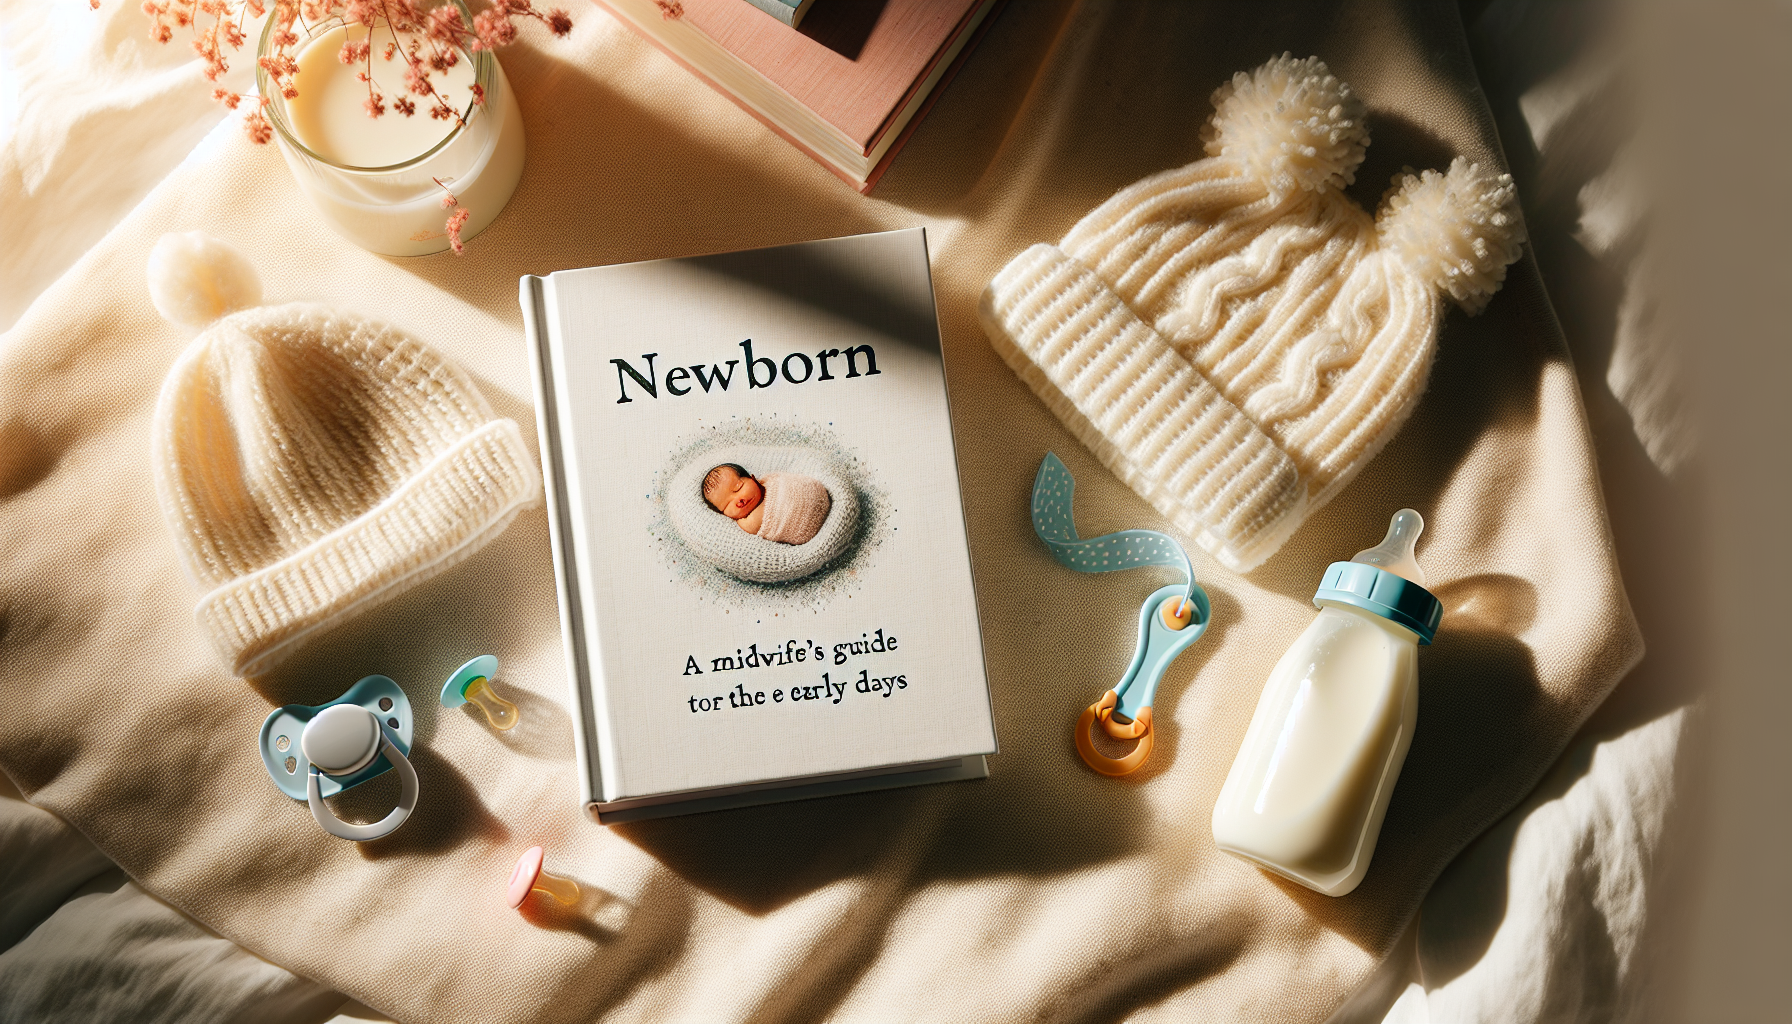 Newborn: A midwifes guide to the early days     Kindle Edition